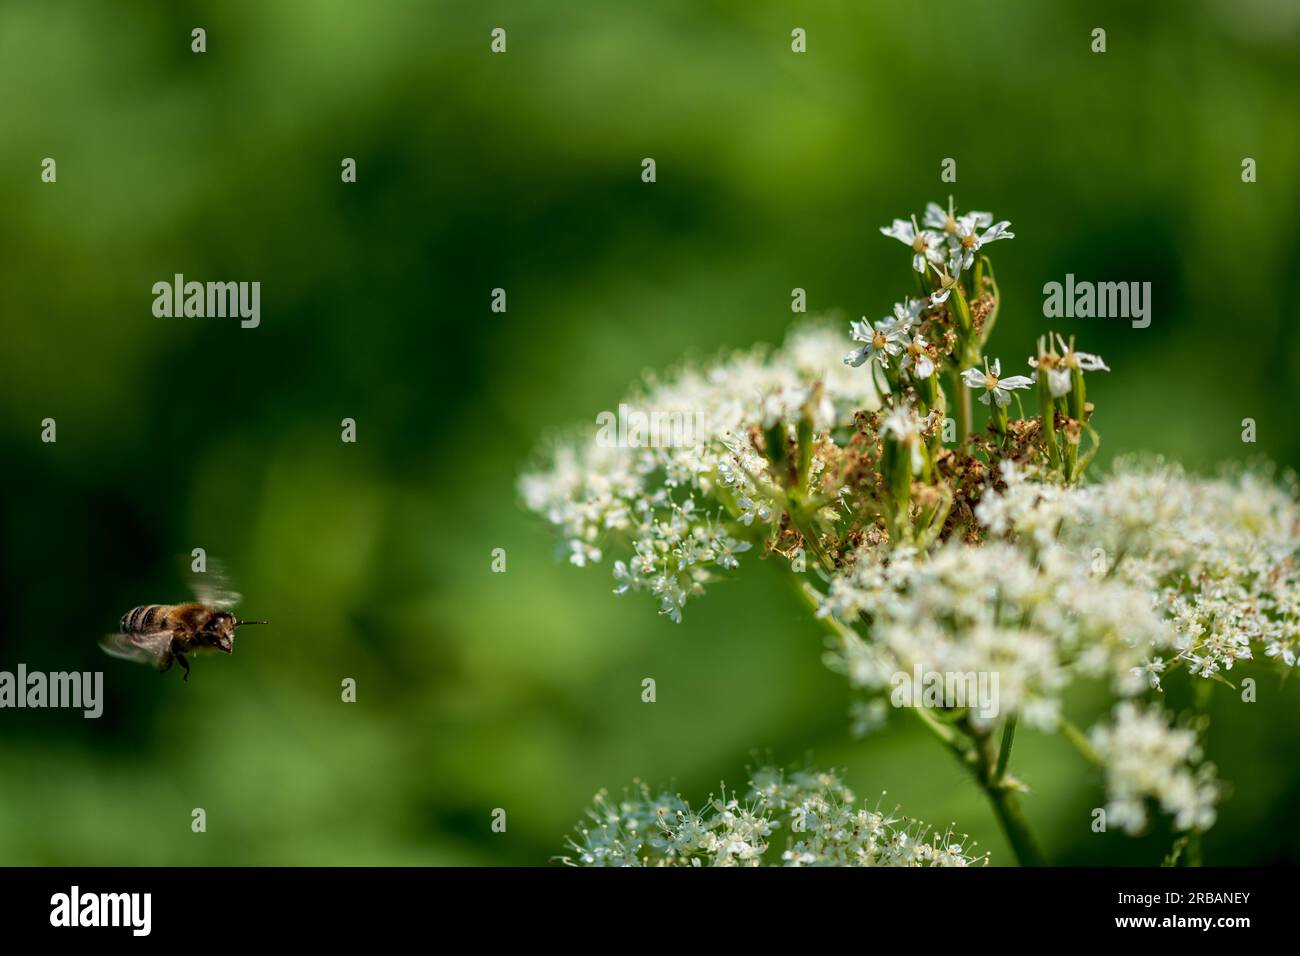 Valerian and bee. Valeriana officinalis, is a wild plant with white flowers. It is an important medicinal plant and is also used in medicine. Stock Photo